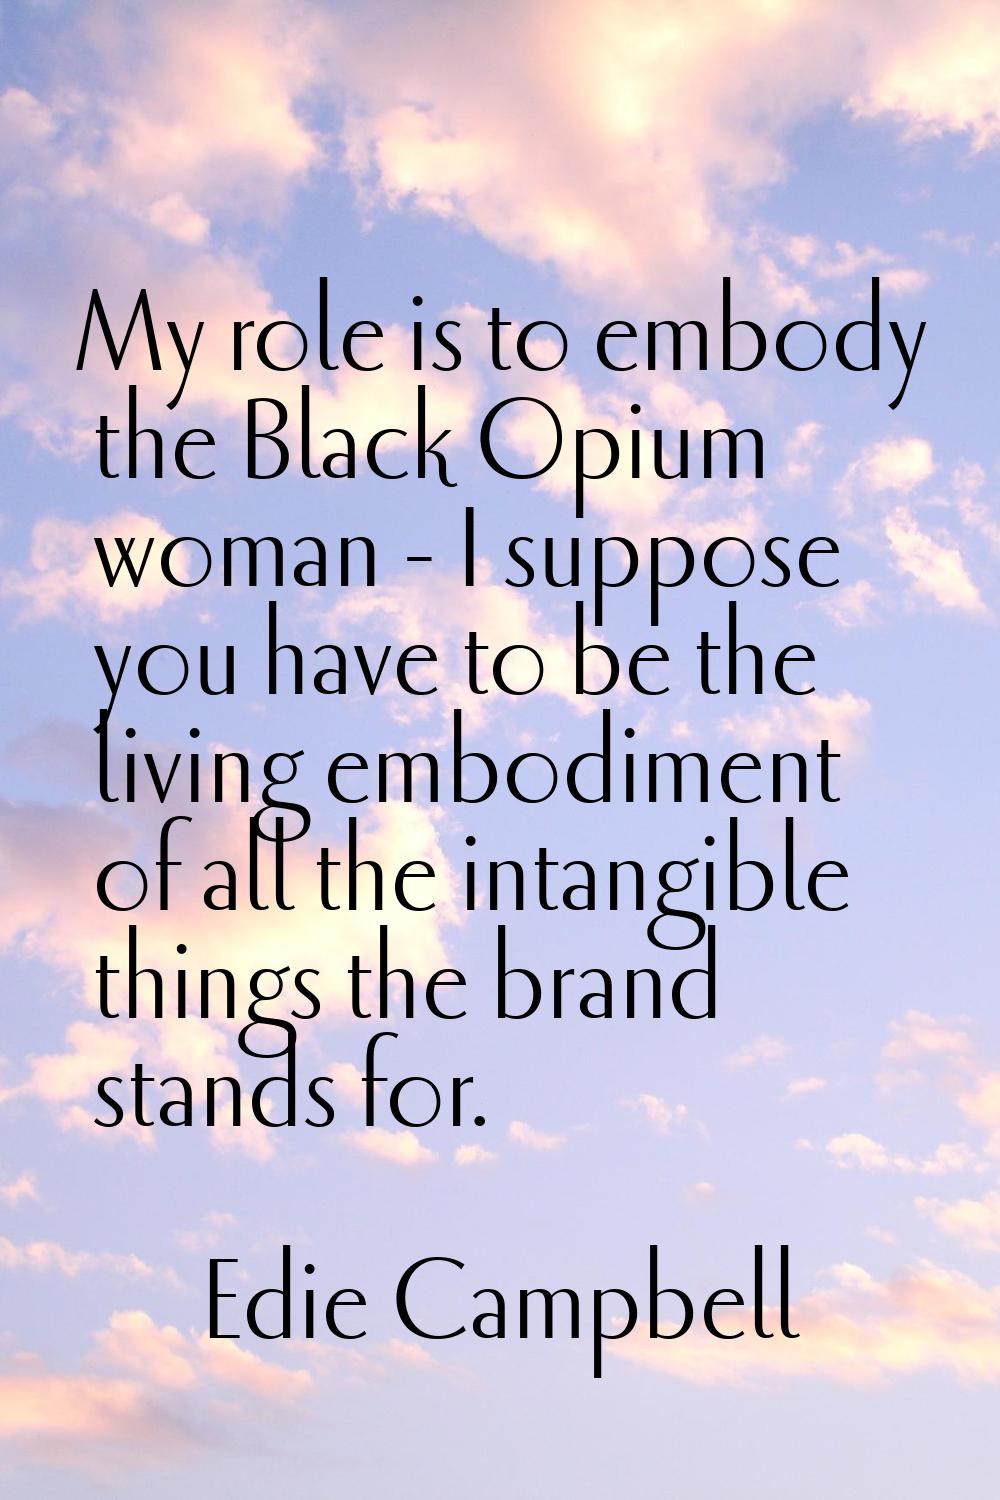 My role is to embody the Black Opium woman - I suppose you have to be the living embodiment of all 